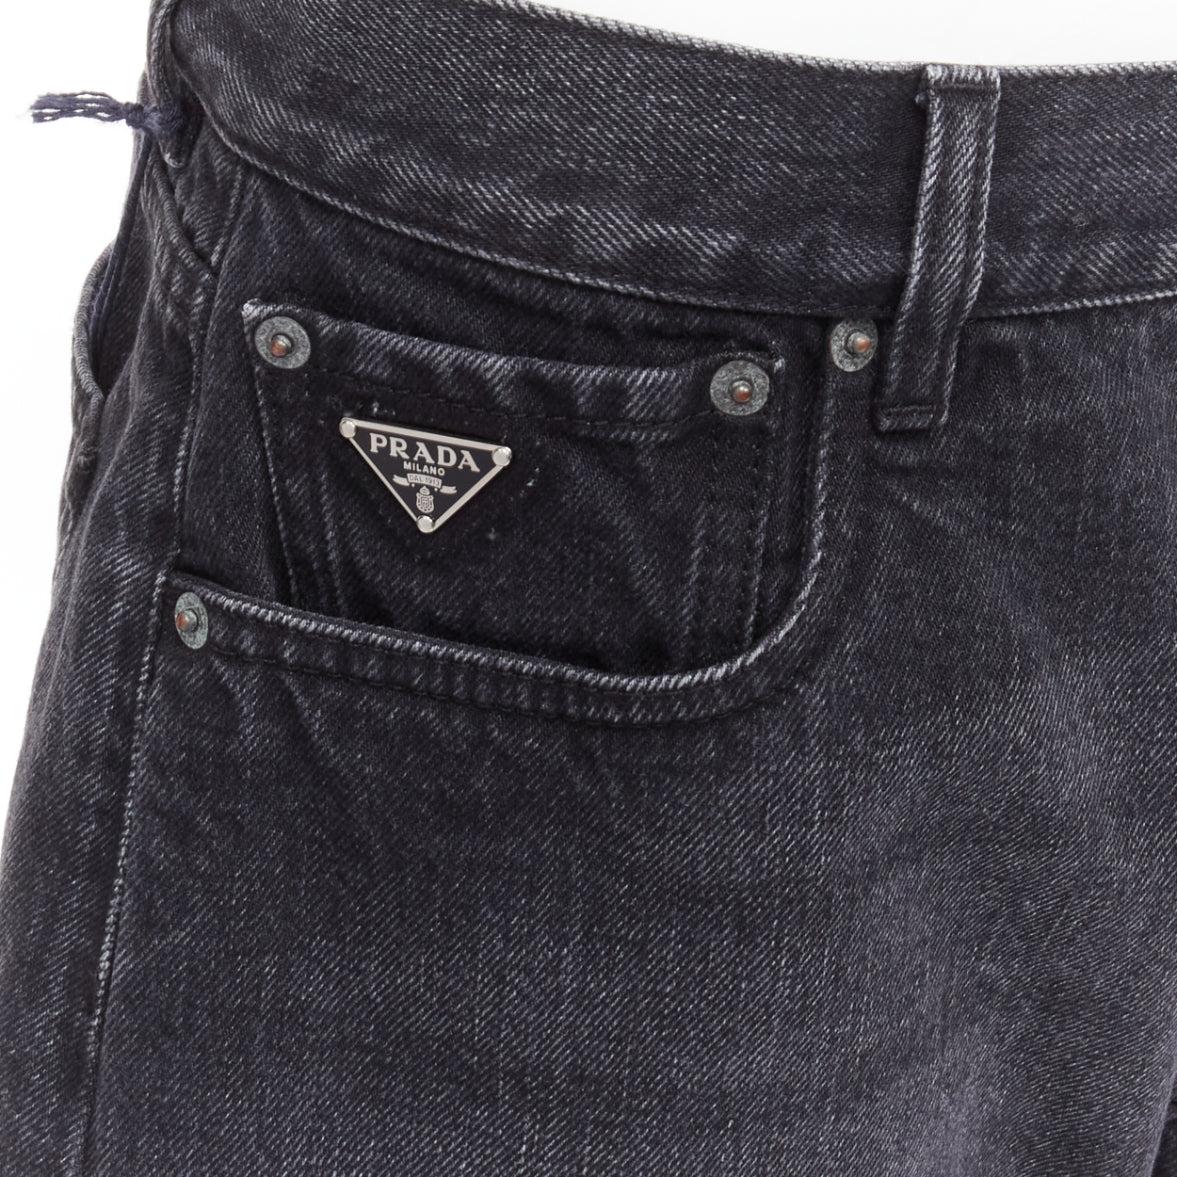 new PRADA 2023 Symbole triangle logo grey washed denim high waist wide short shorts S
Reference: TGAS/D00590
Brand: Prada
Designer: Miuccia Prada
Collection: Symbole
Material: Cotton
Color: Grey
Pattern: Solid
Closure: Button Fly
Made in: